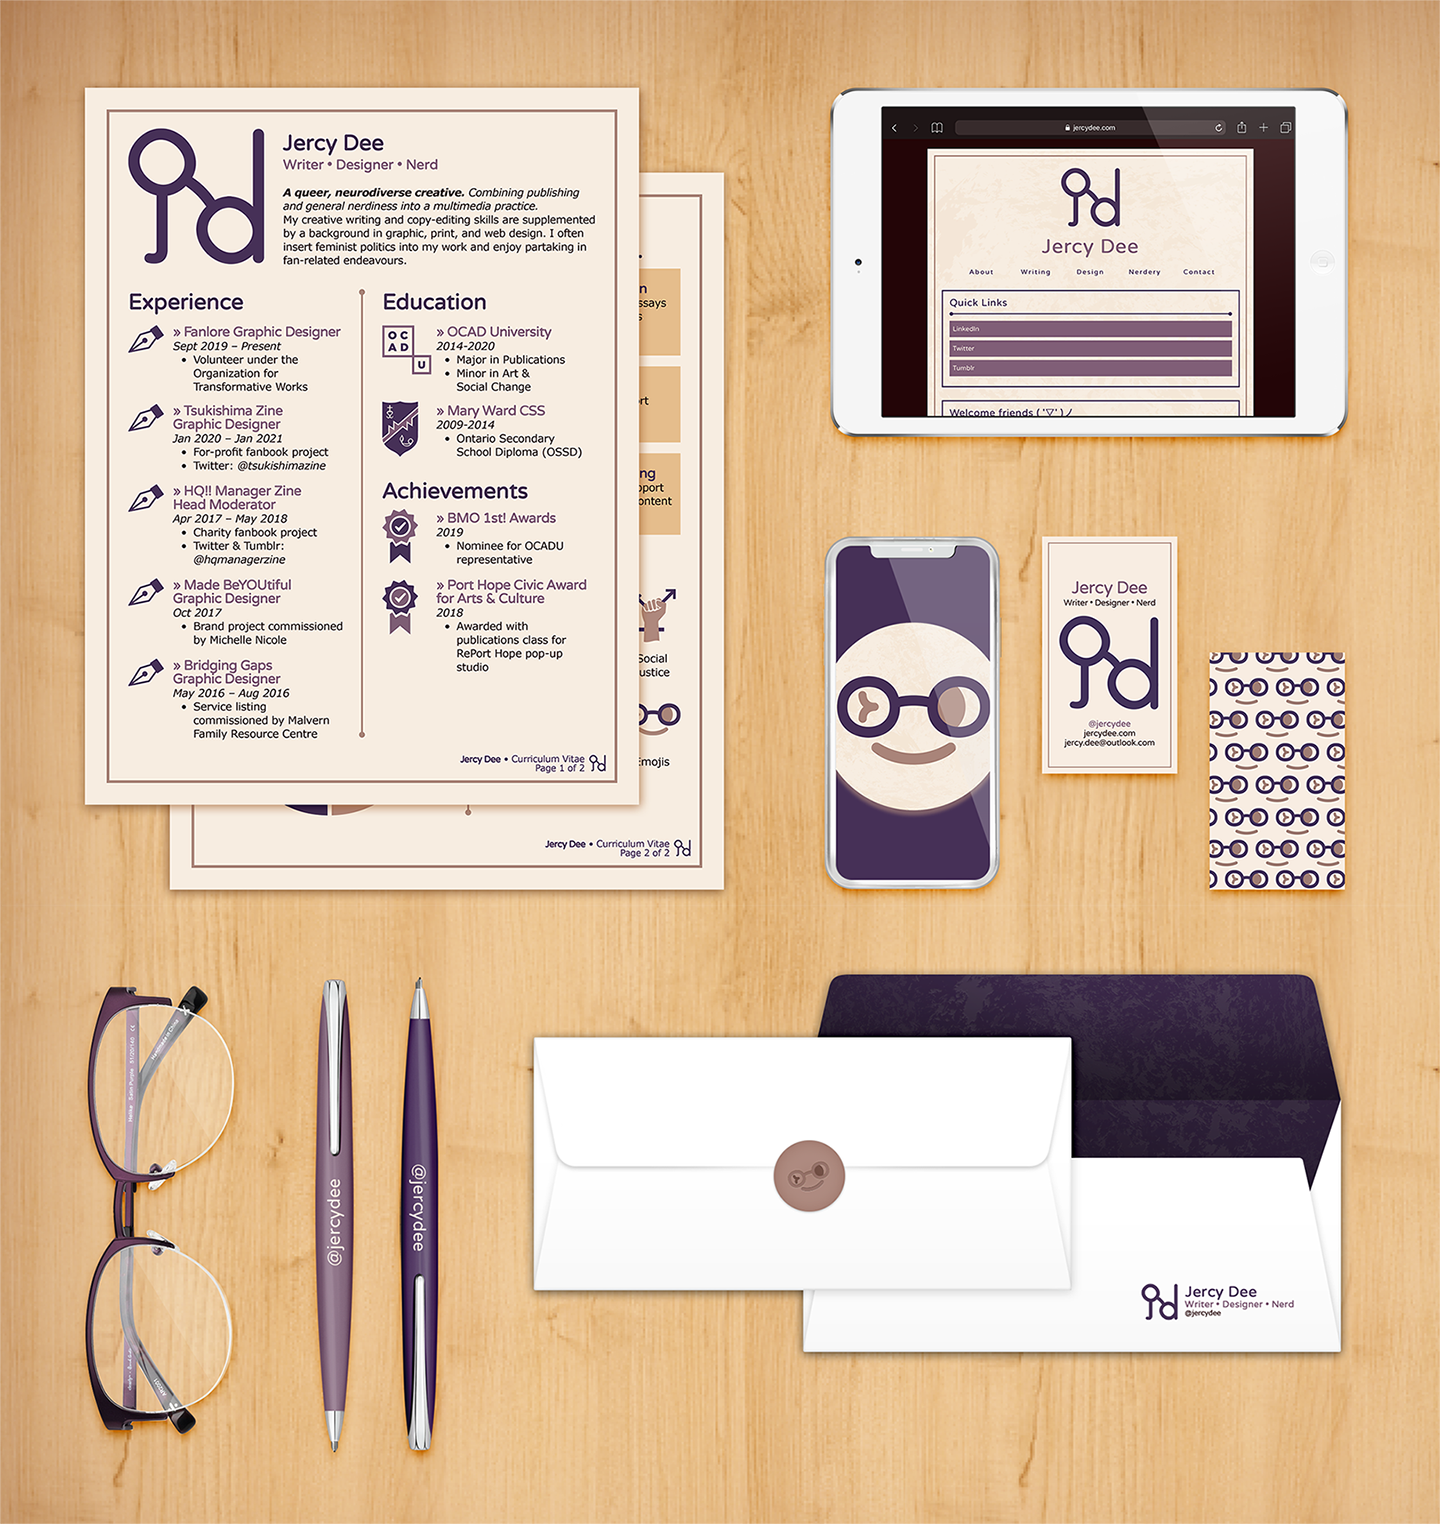 My brand applied onto different materials (CV, website on a tablet and mobile phone, business cards, pens, and envelopes) alongside my glasses against a wood background.